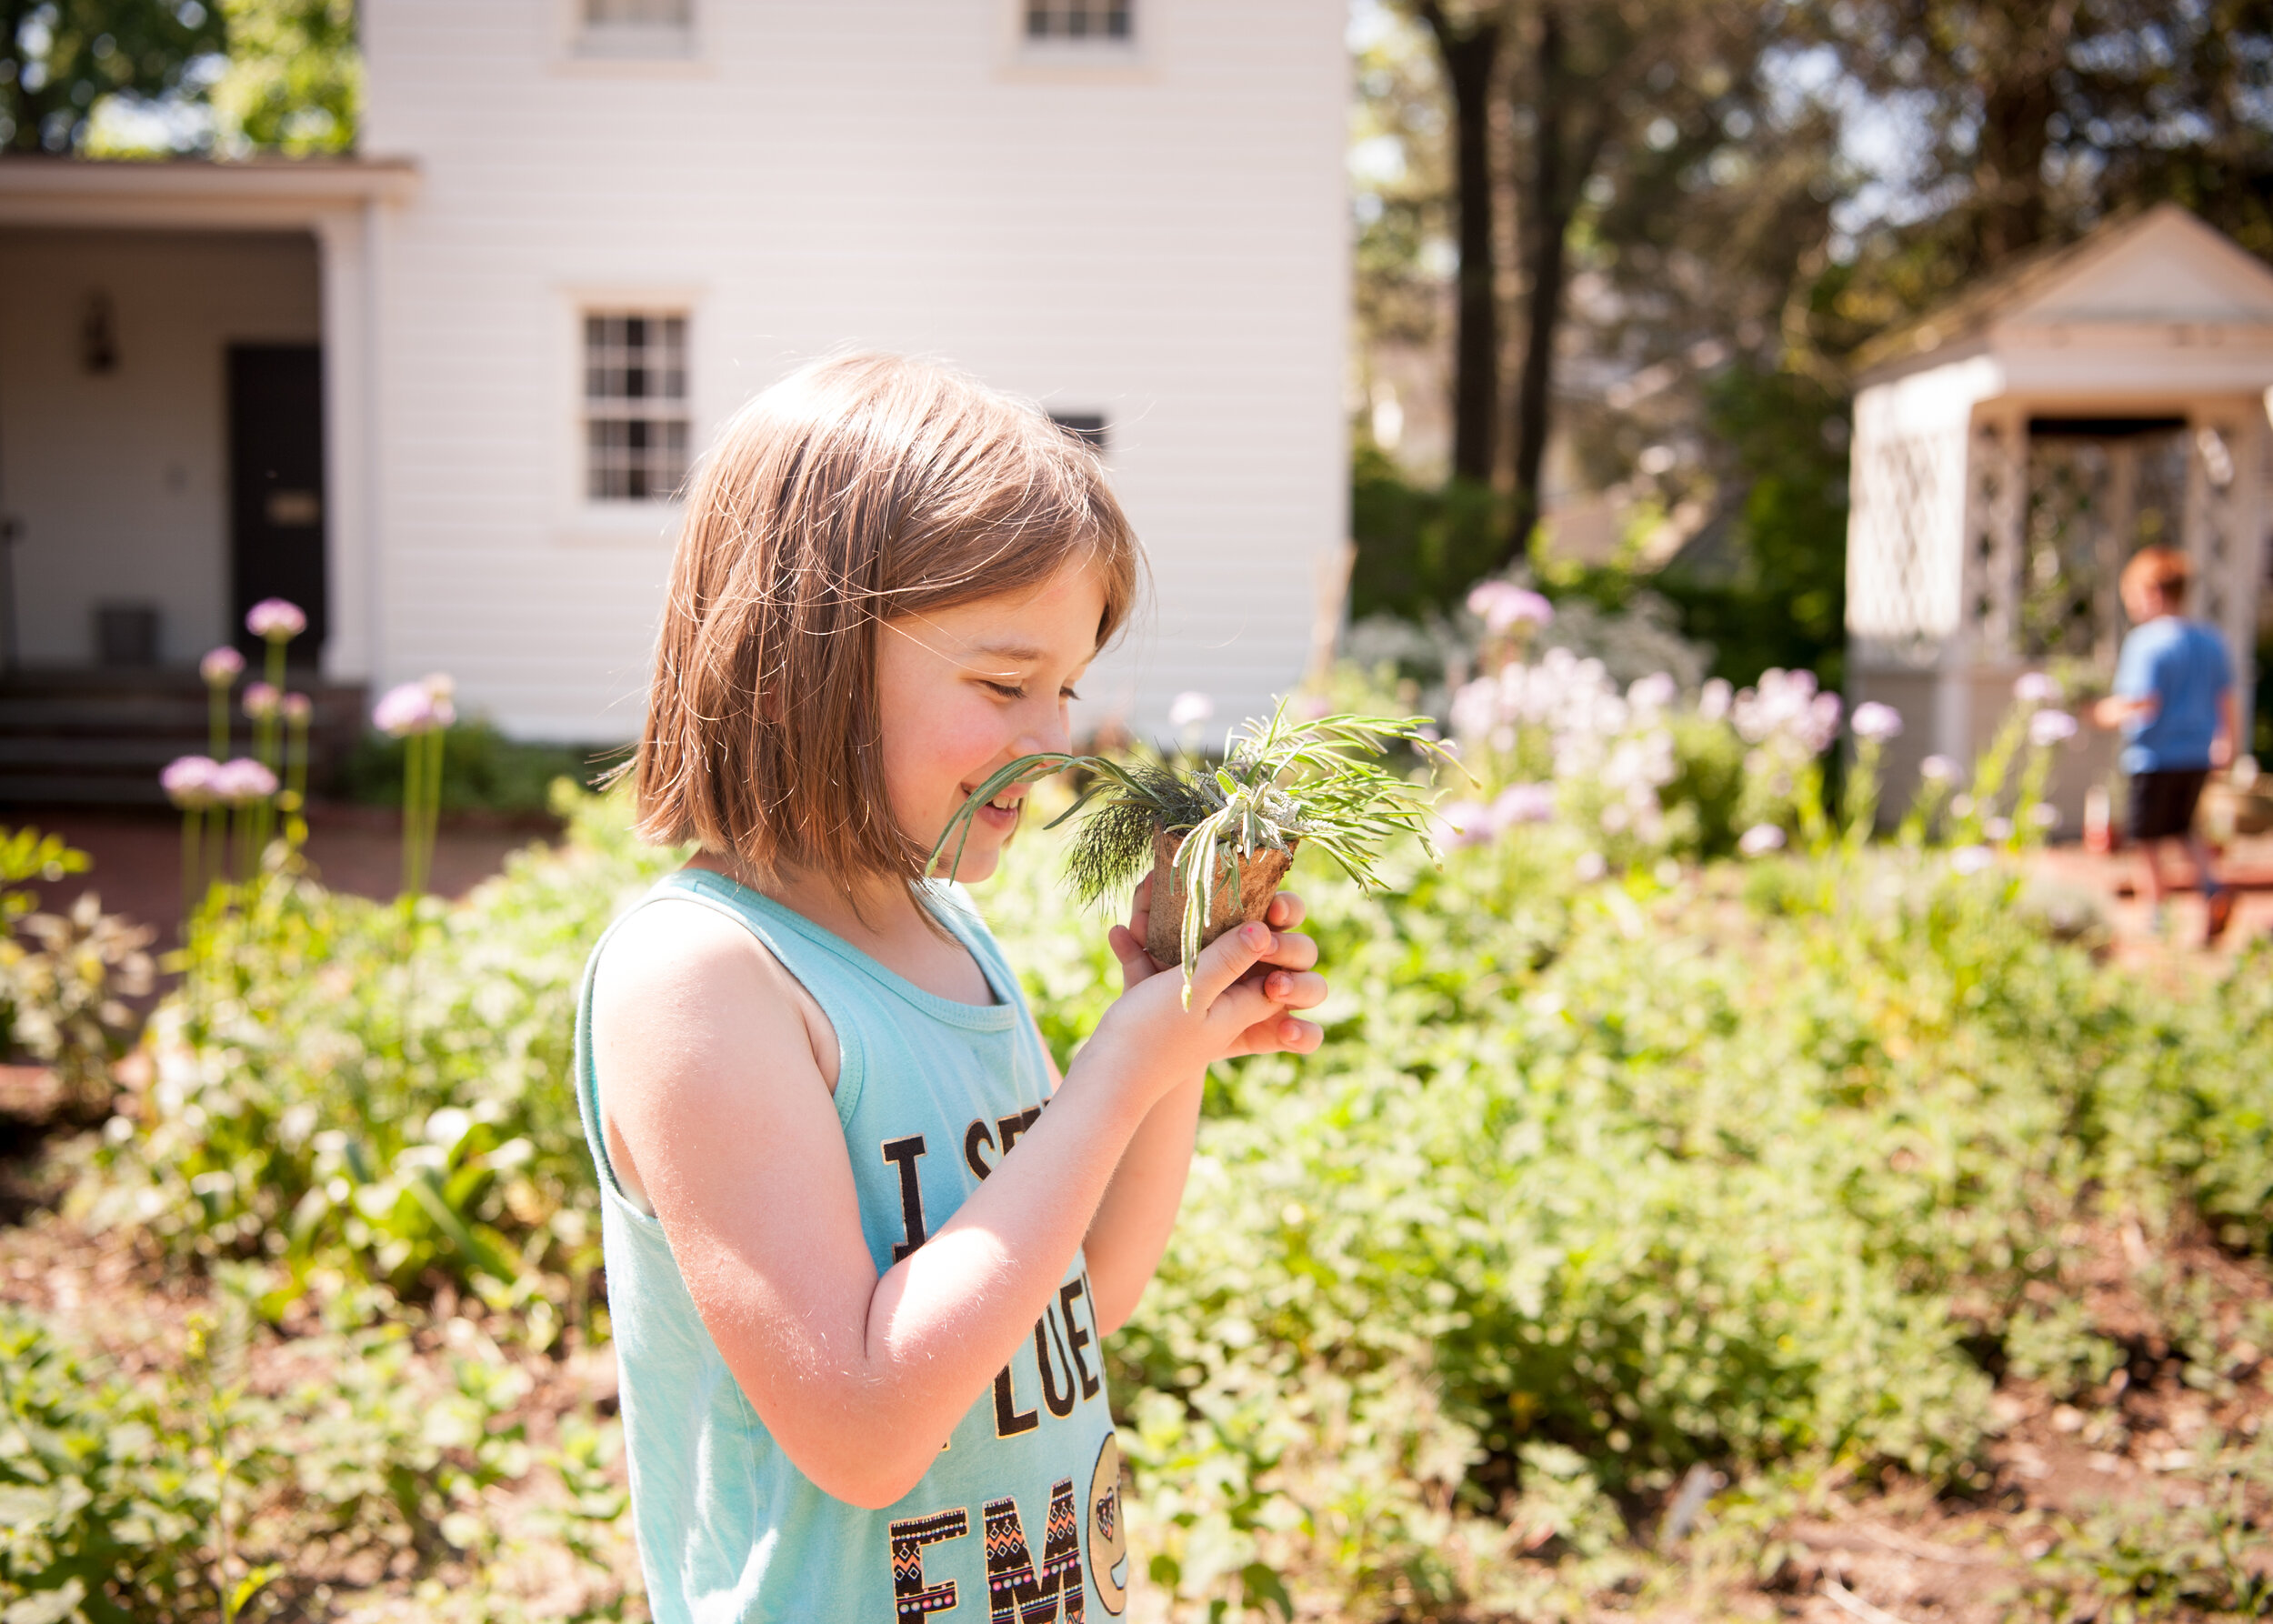  Young girl holding potted plant with wonder, in Landsberger Learning Garden 